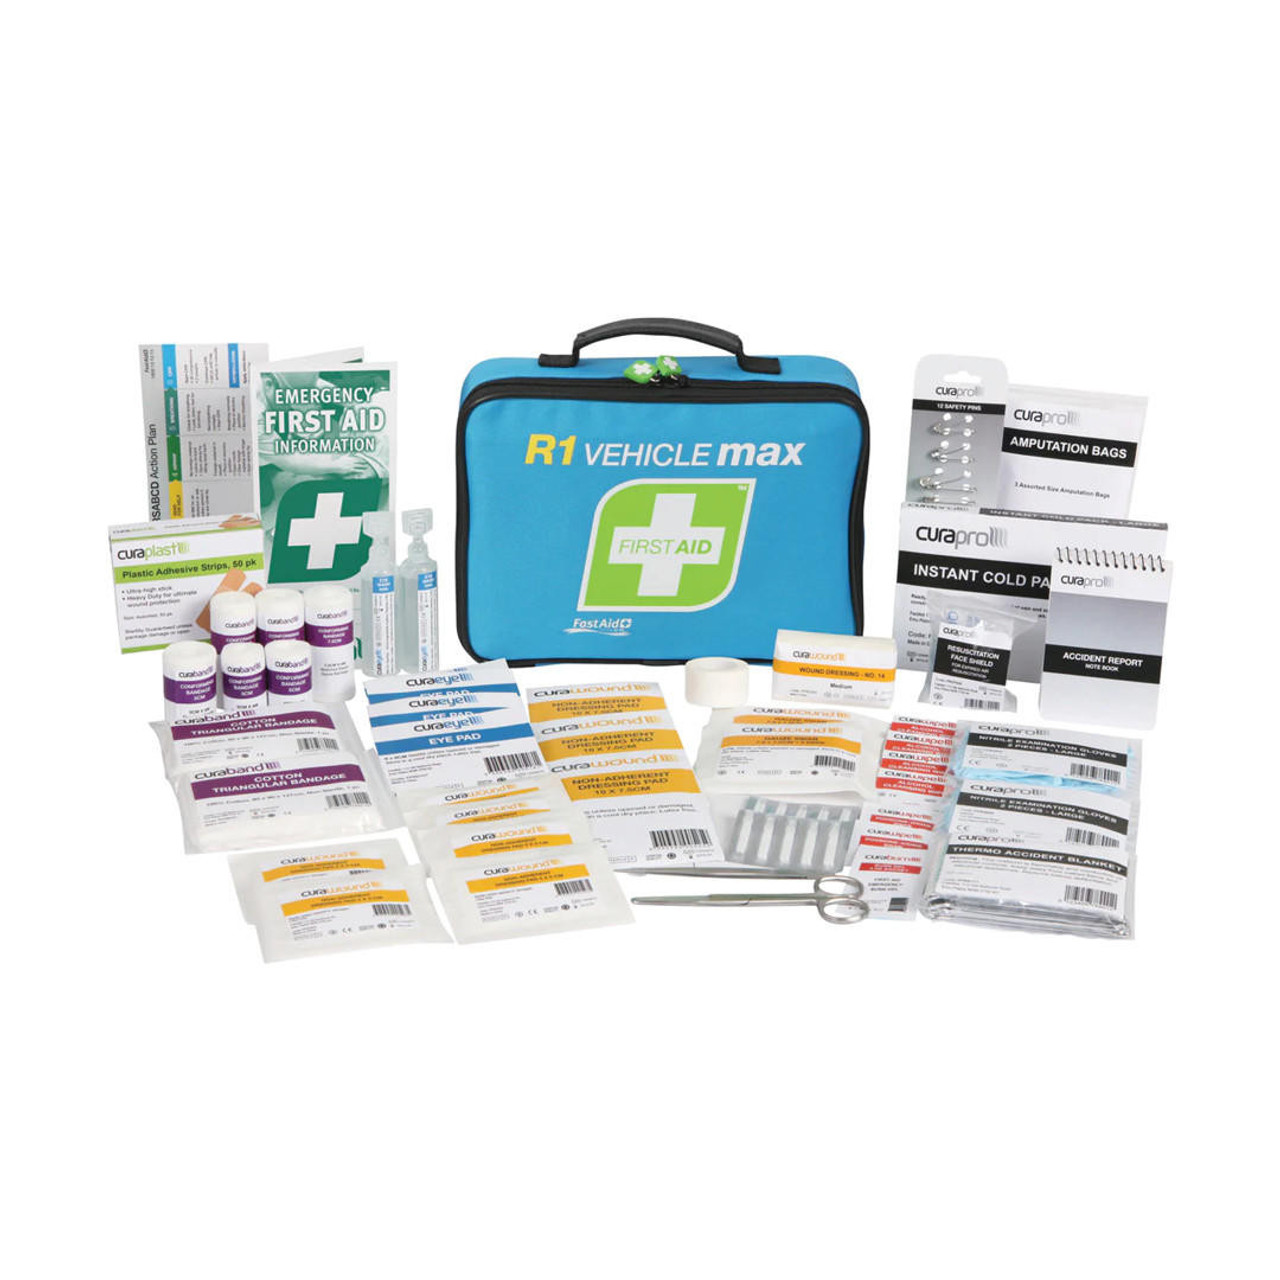 FastAid R1 Vehicle Max First Aid Kit Soft Pack FAR1V30